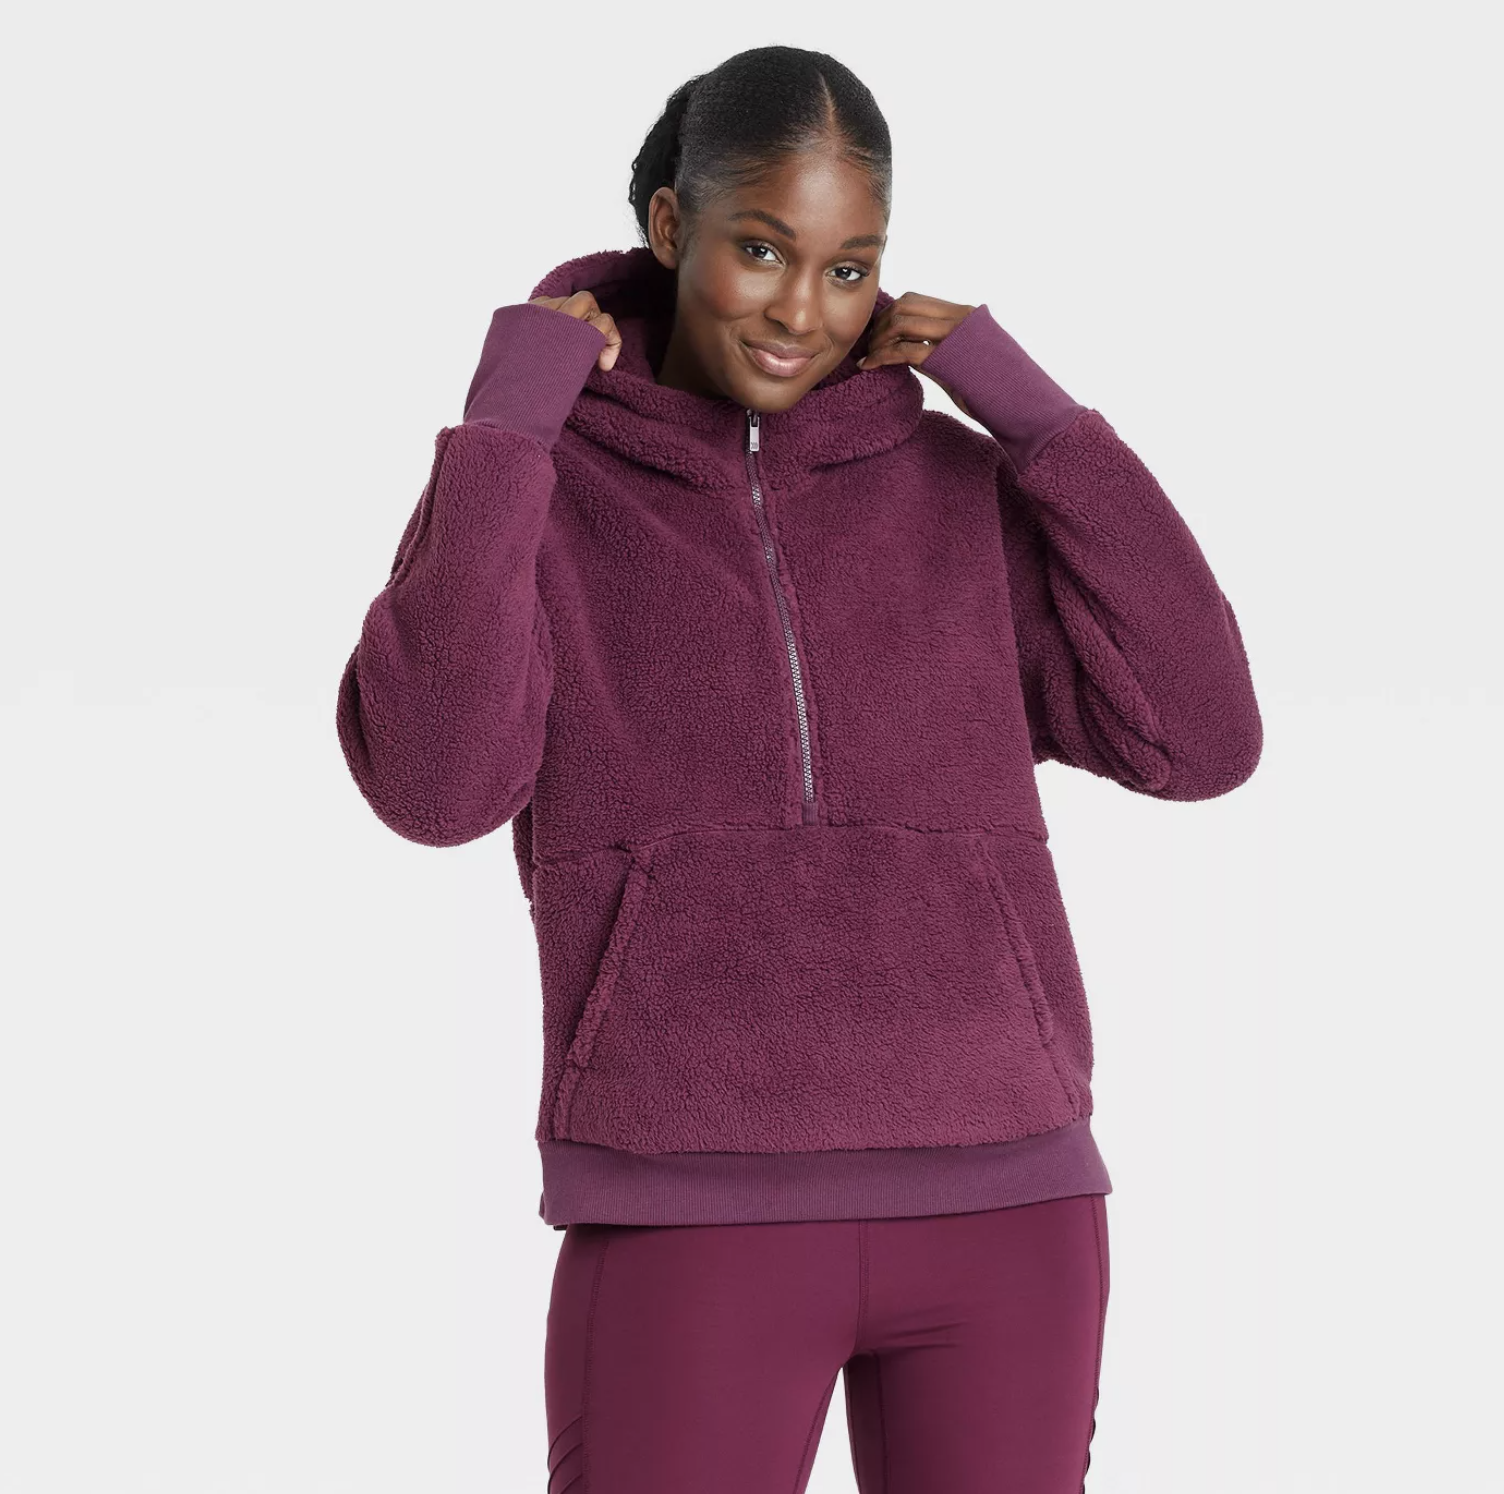 model wearing the pullover in plum